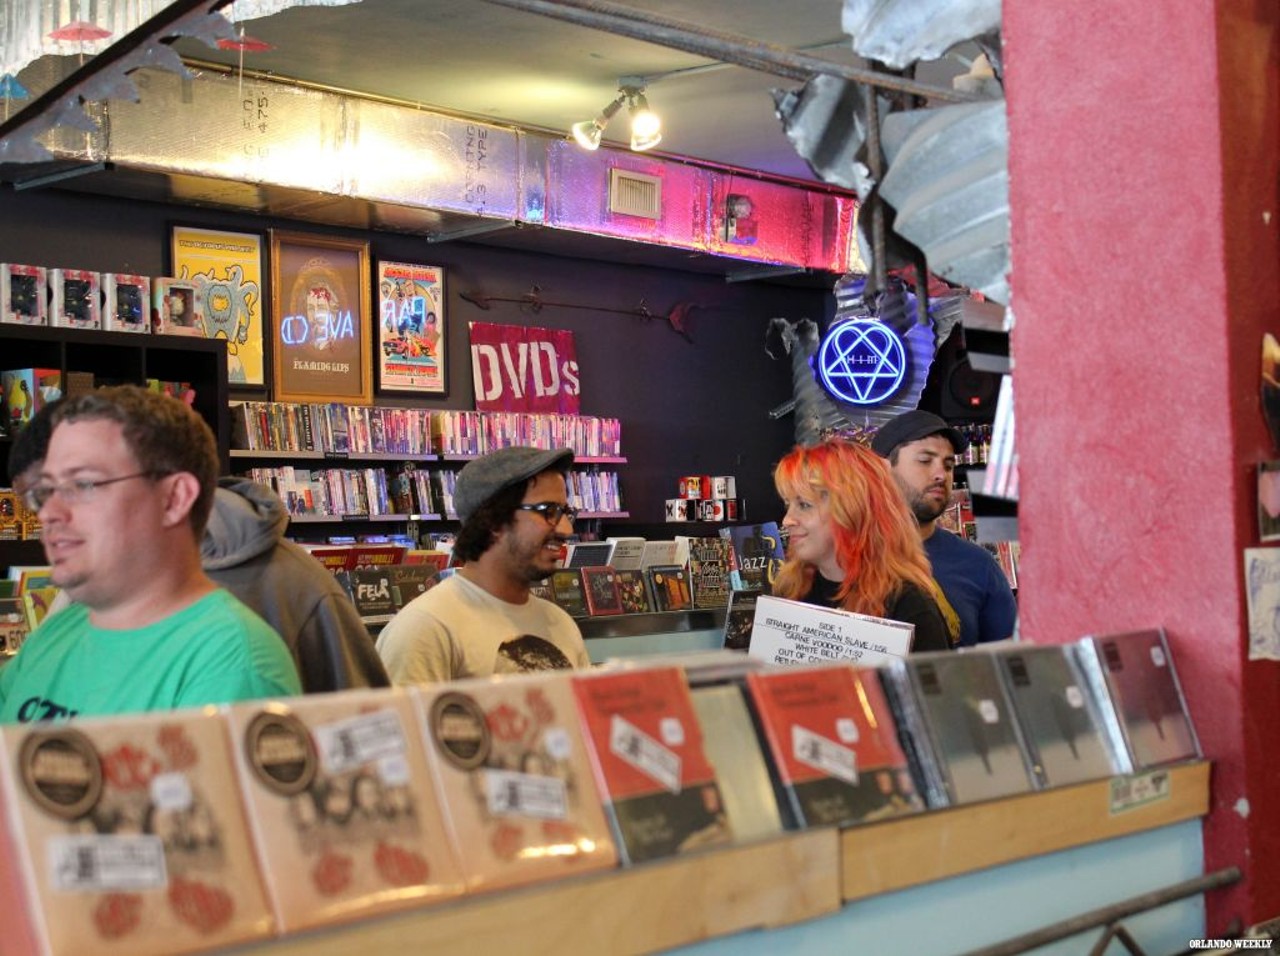 Record Store Day 2013 @ Park Ave CDs